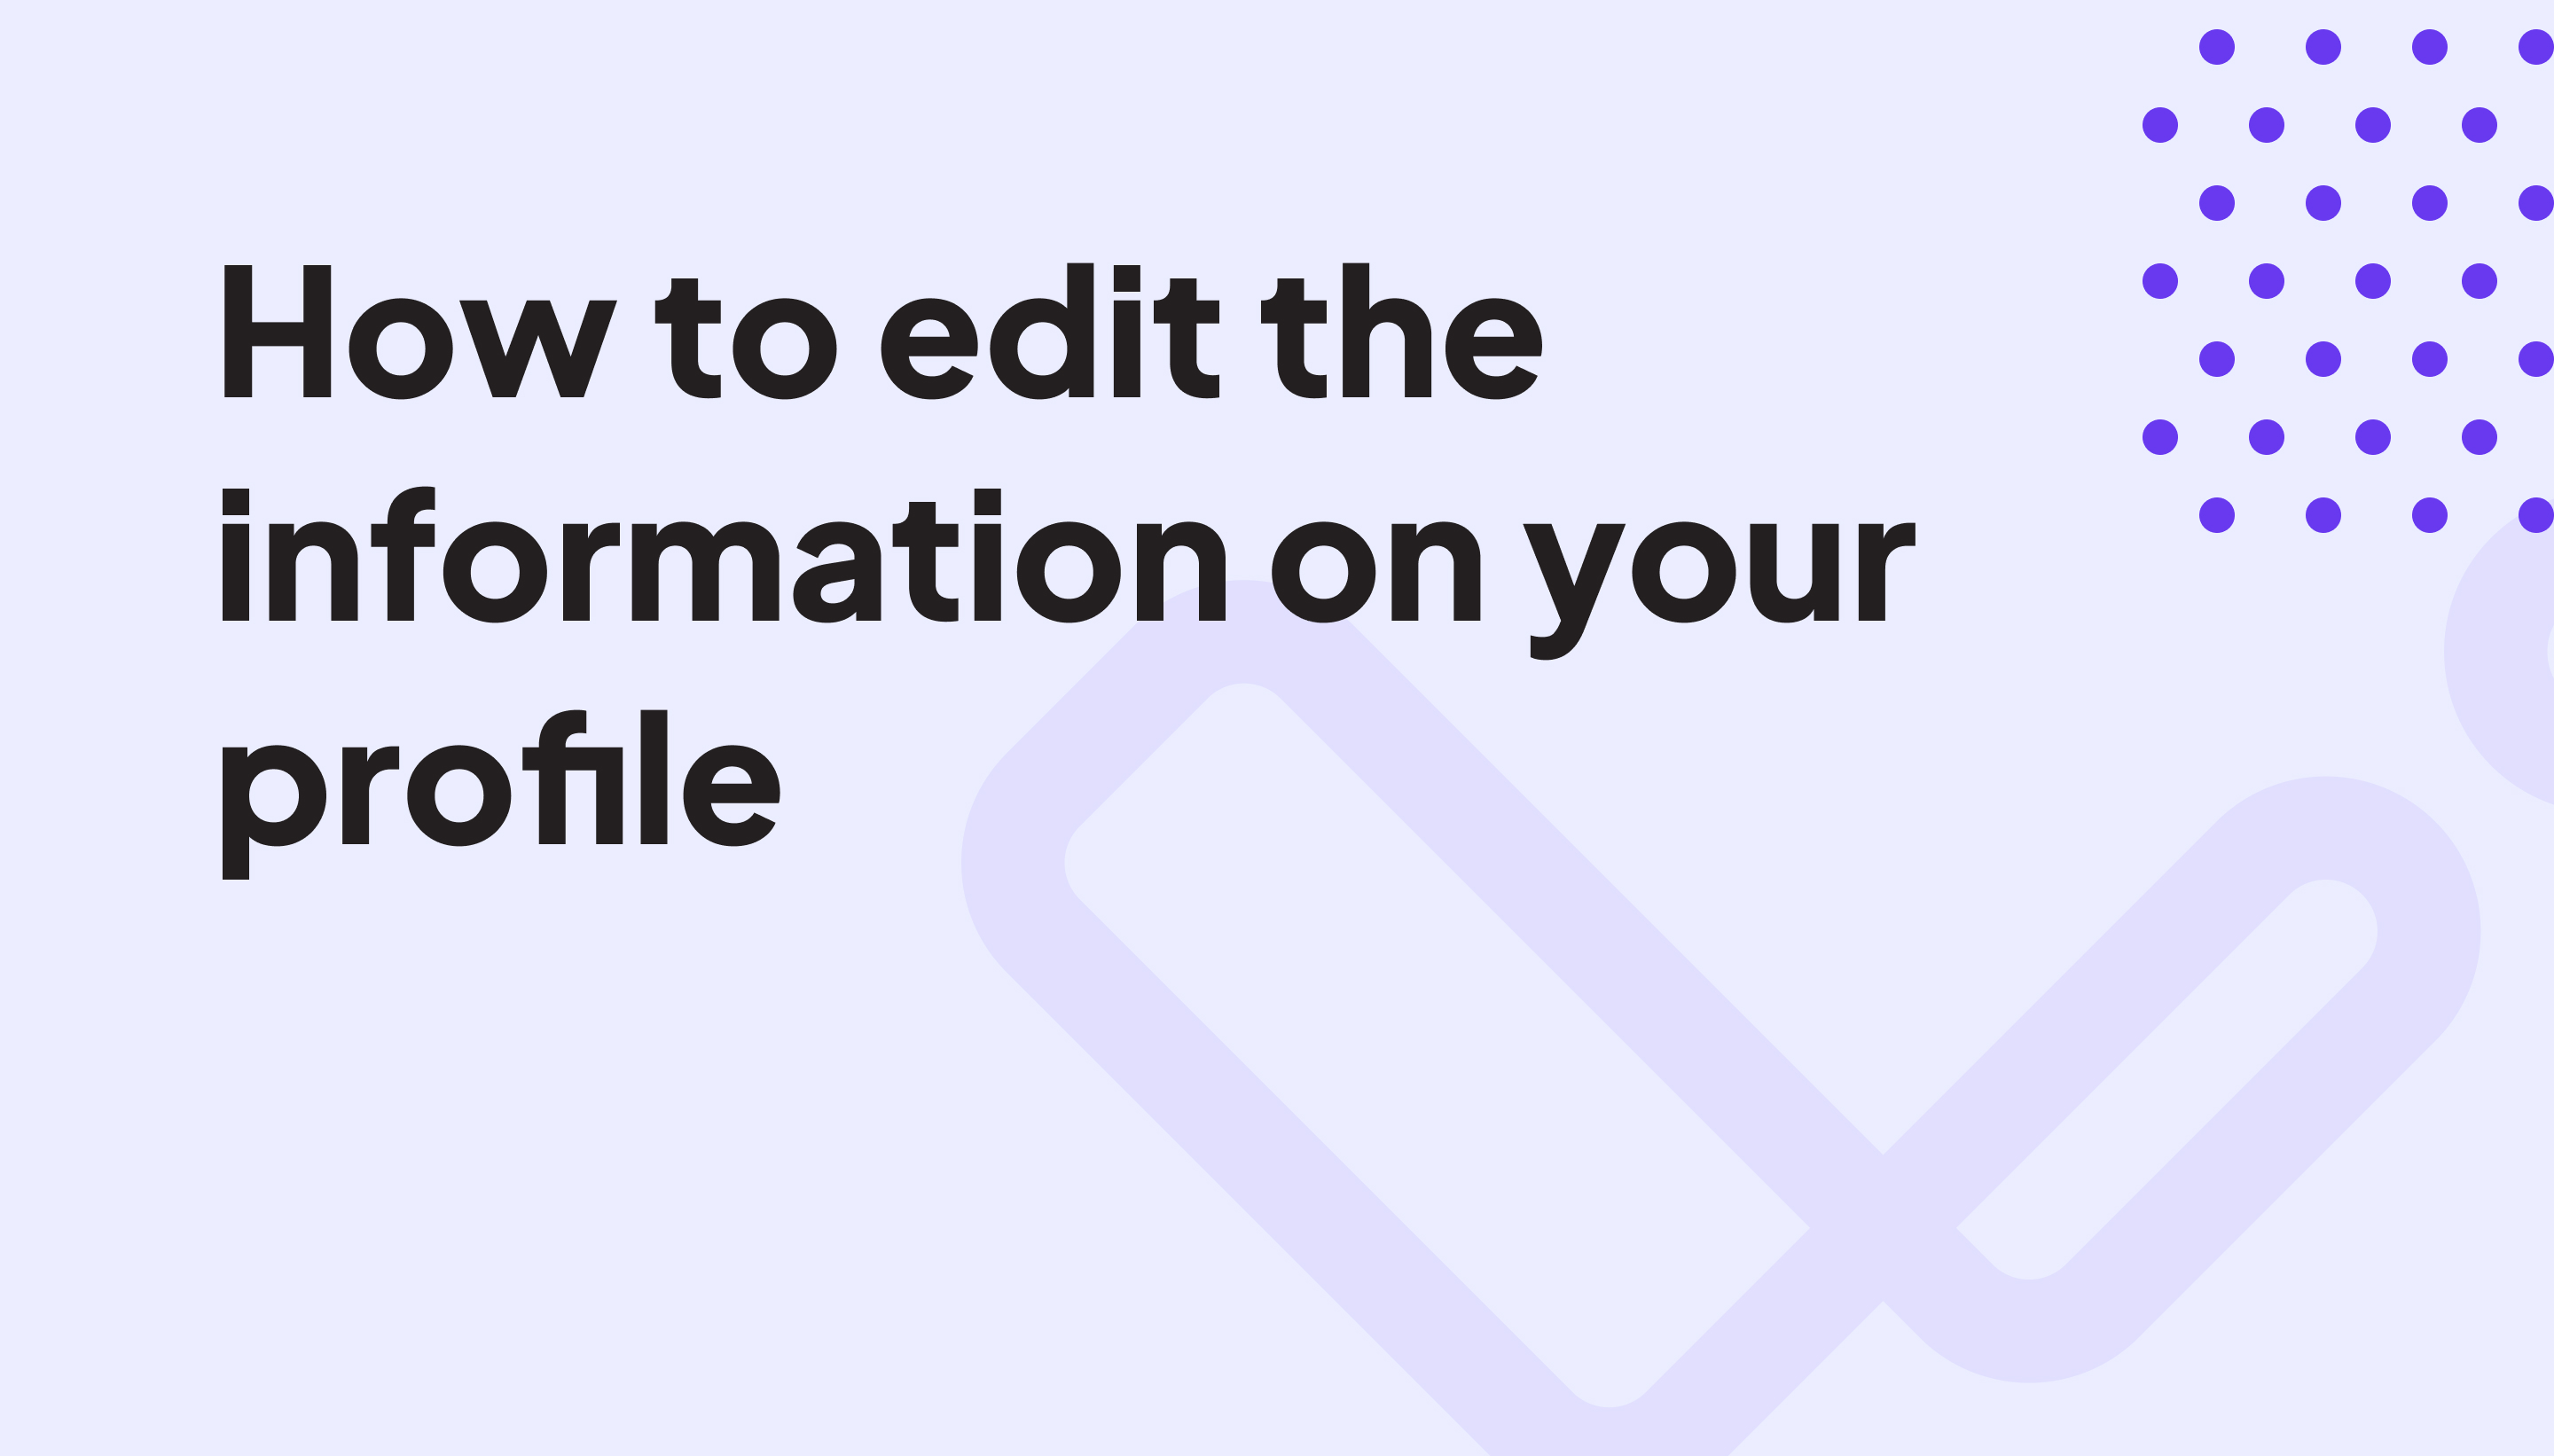 How to edit the information on your profile